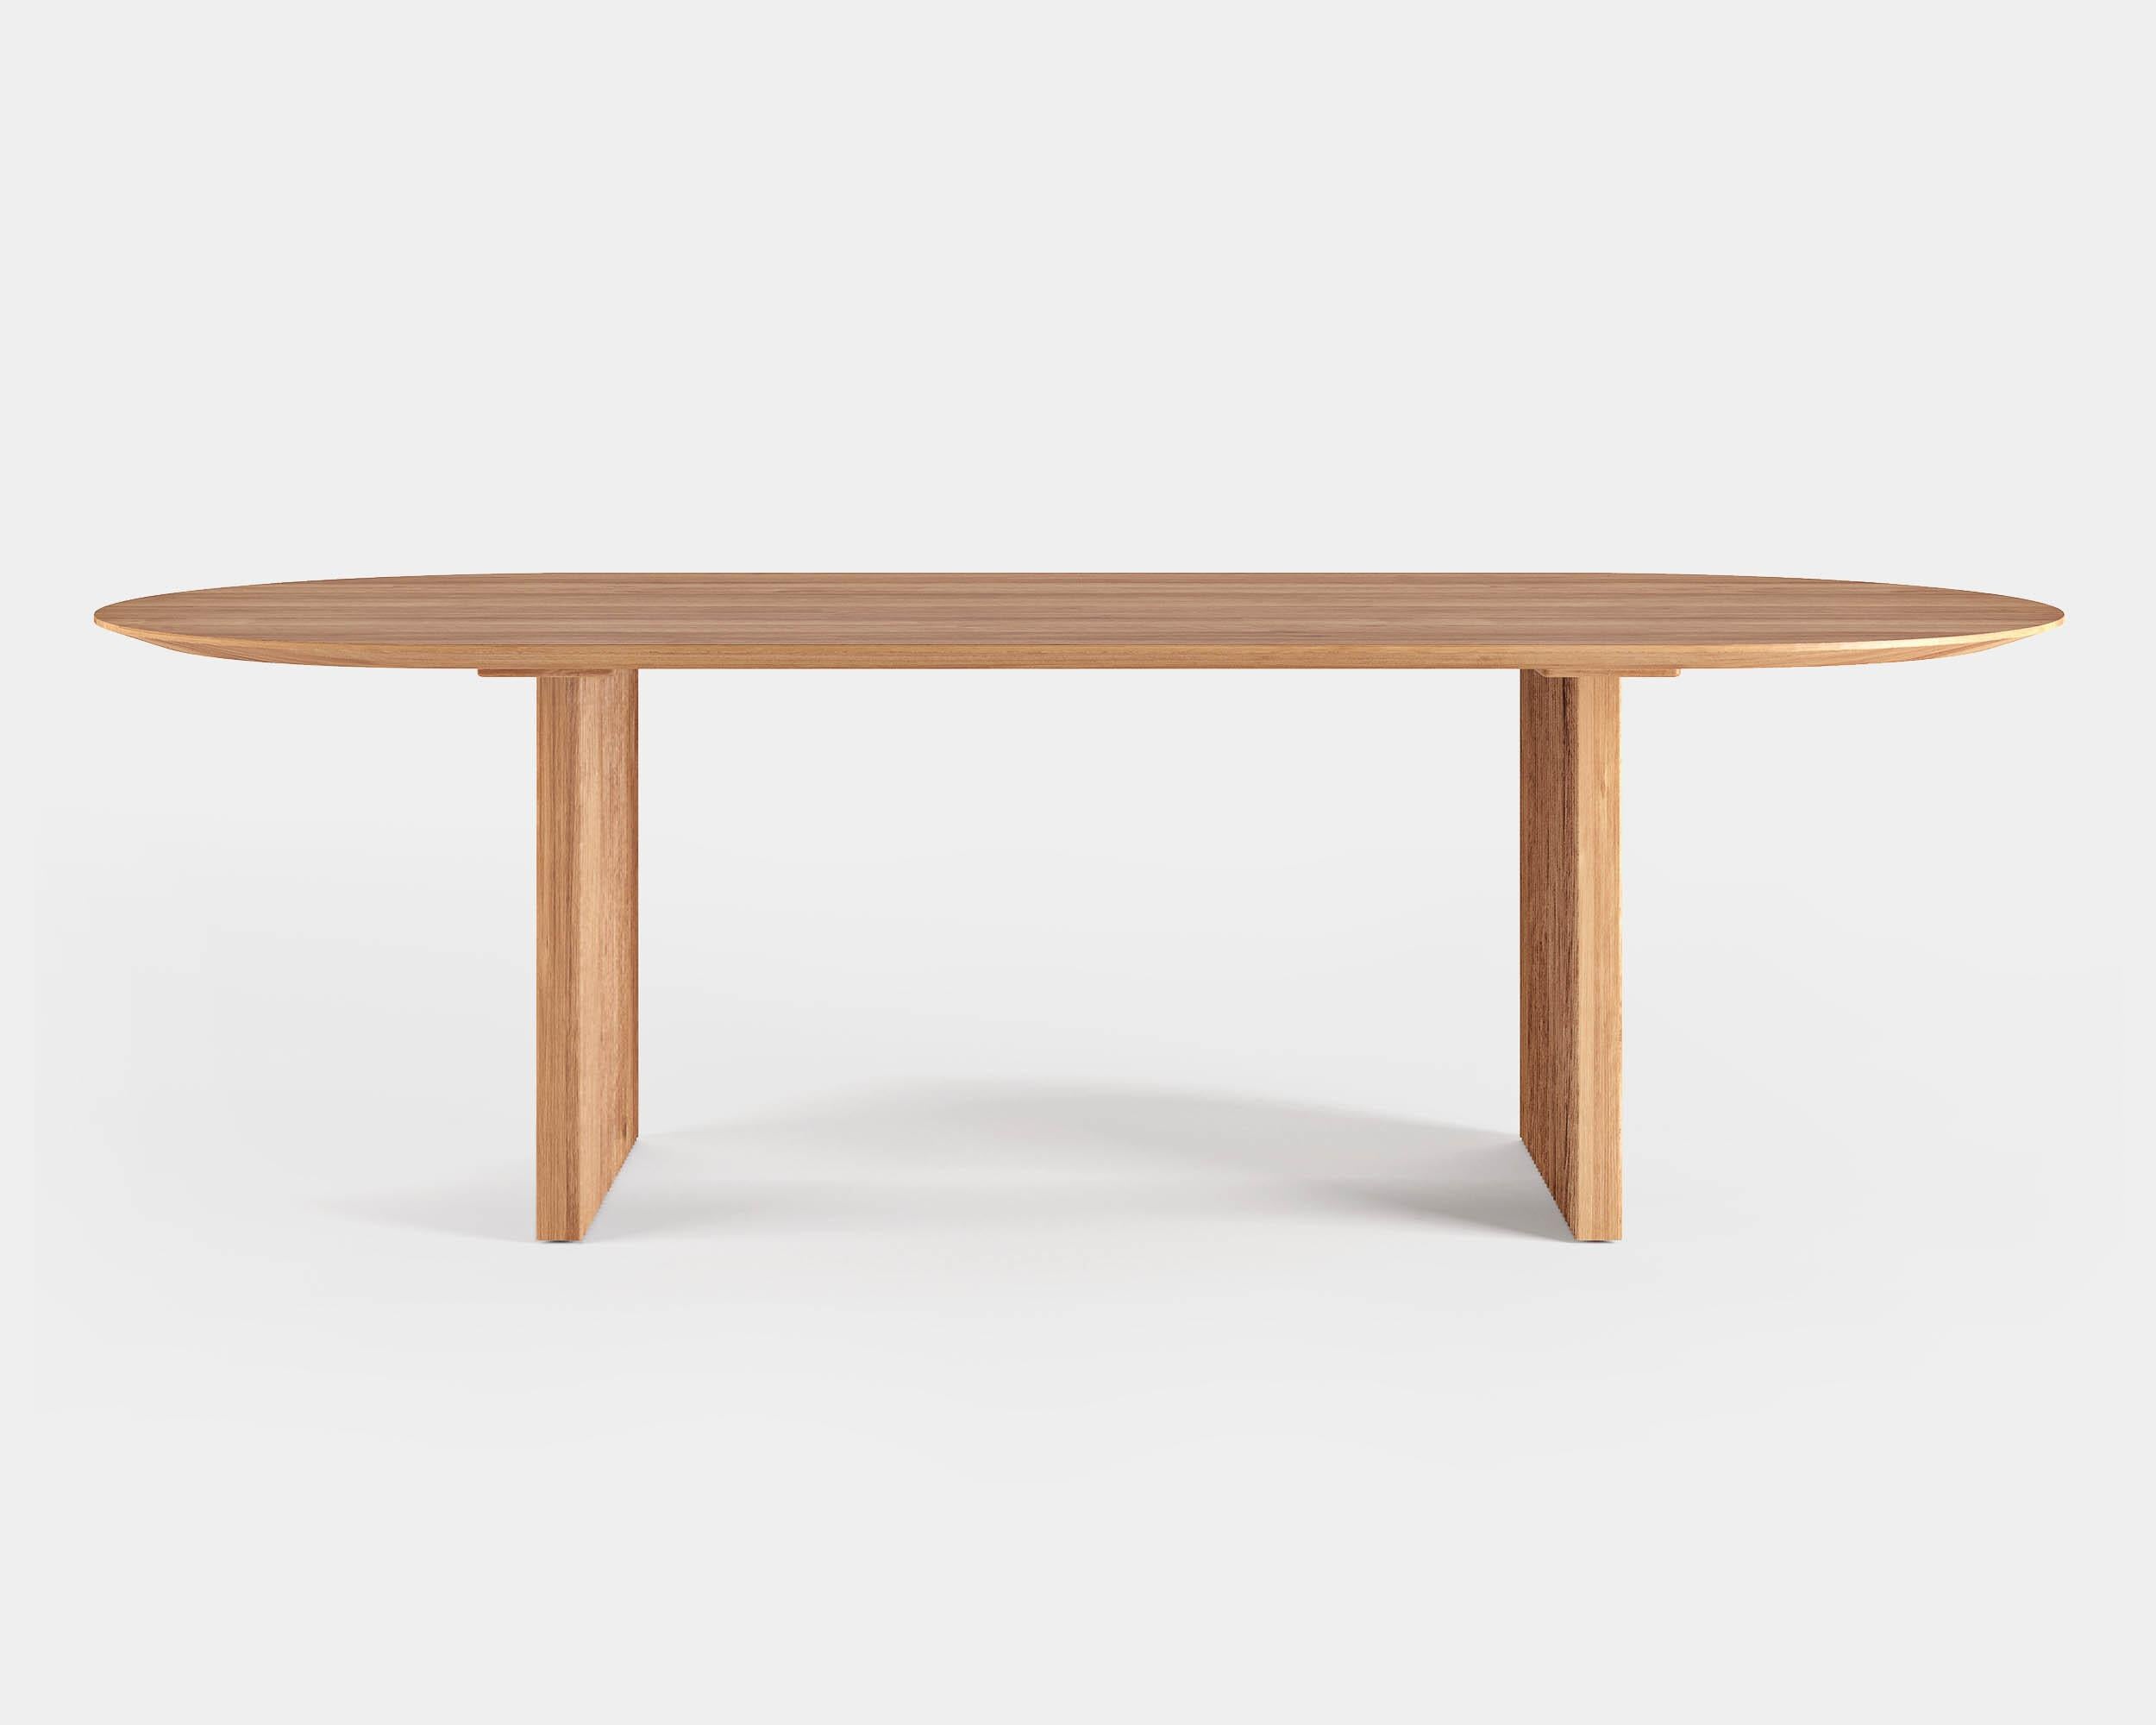 Ten dining table, oval, 270cm.
Solid wood table top and legs. Handmade in Denmark. 

Measures: Height: 72 or 74 cm.

Table top dimensions:
– 200 x 95 cm
– 240 x 105 cm
– 270 x 105 cm
– 300 x 105 cm
– 340 x 105 cm
– 370 x 105 cm
– 400 x